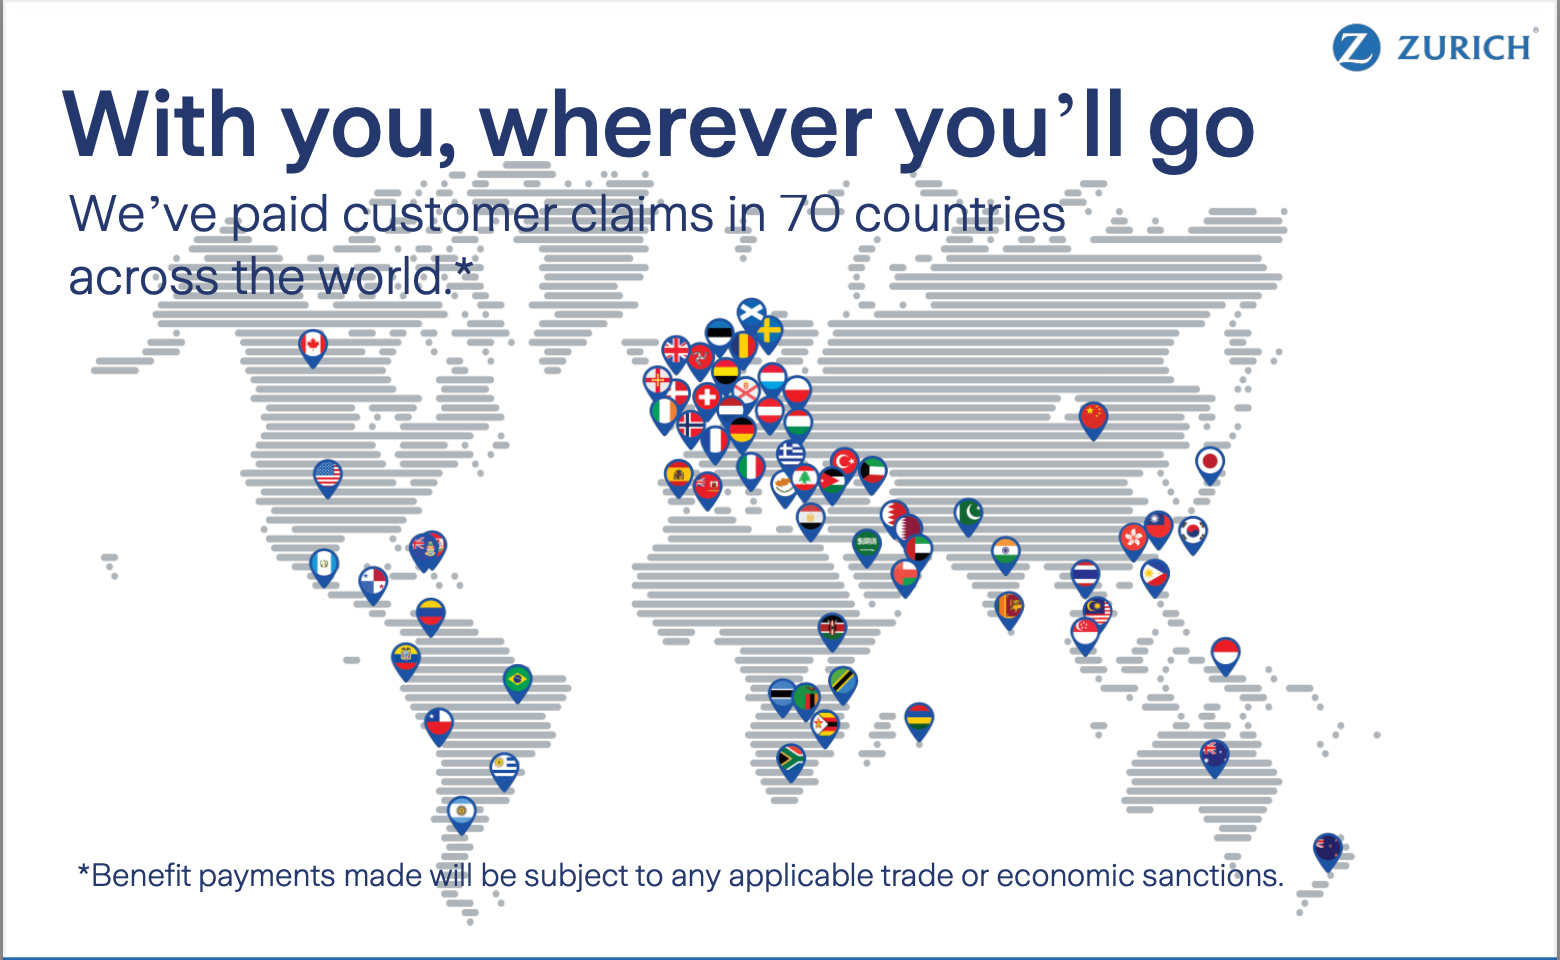 Zurich Life Insurance claims report 2023 - Life insurance claims paid in 70 countries